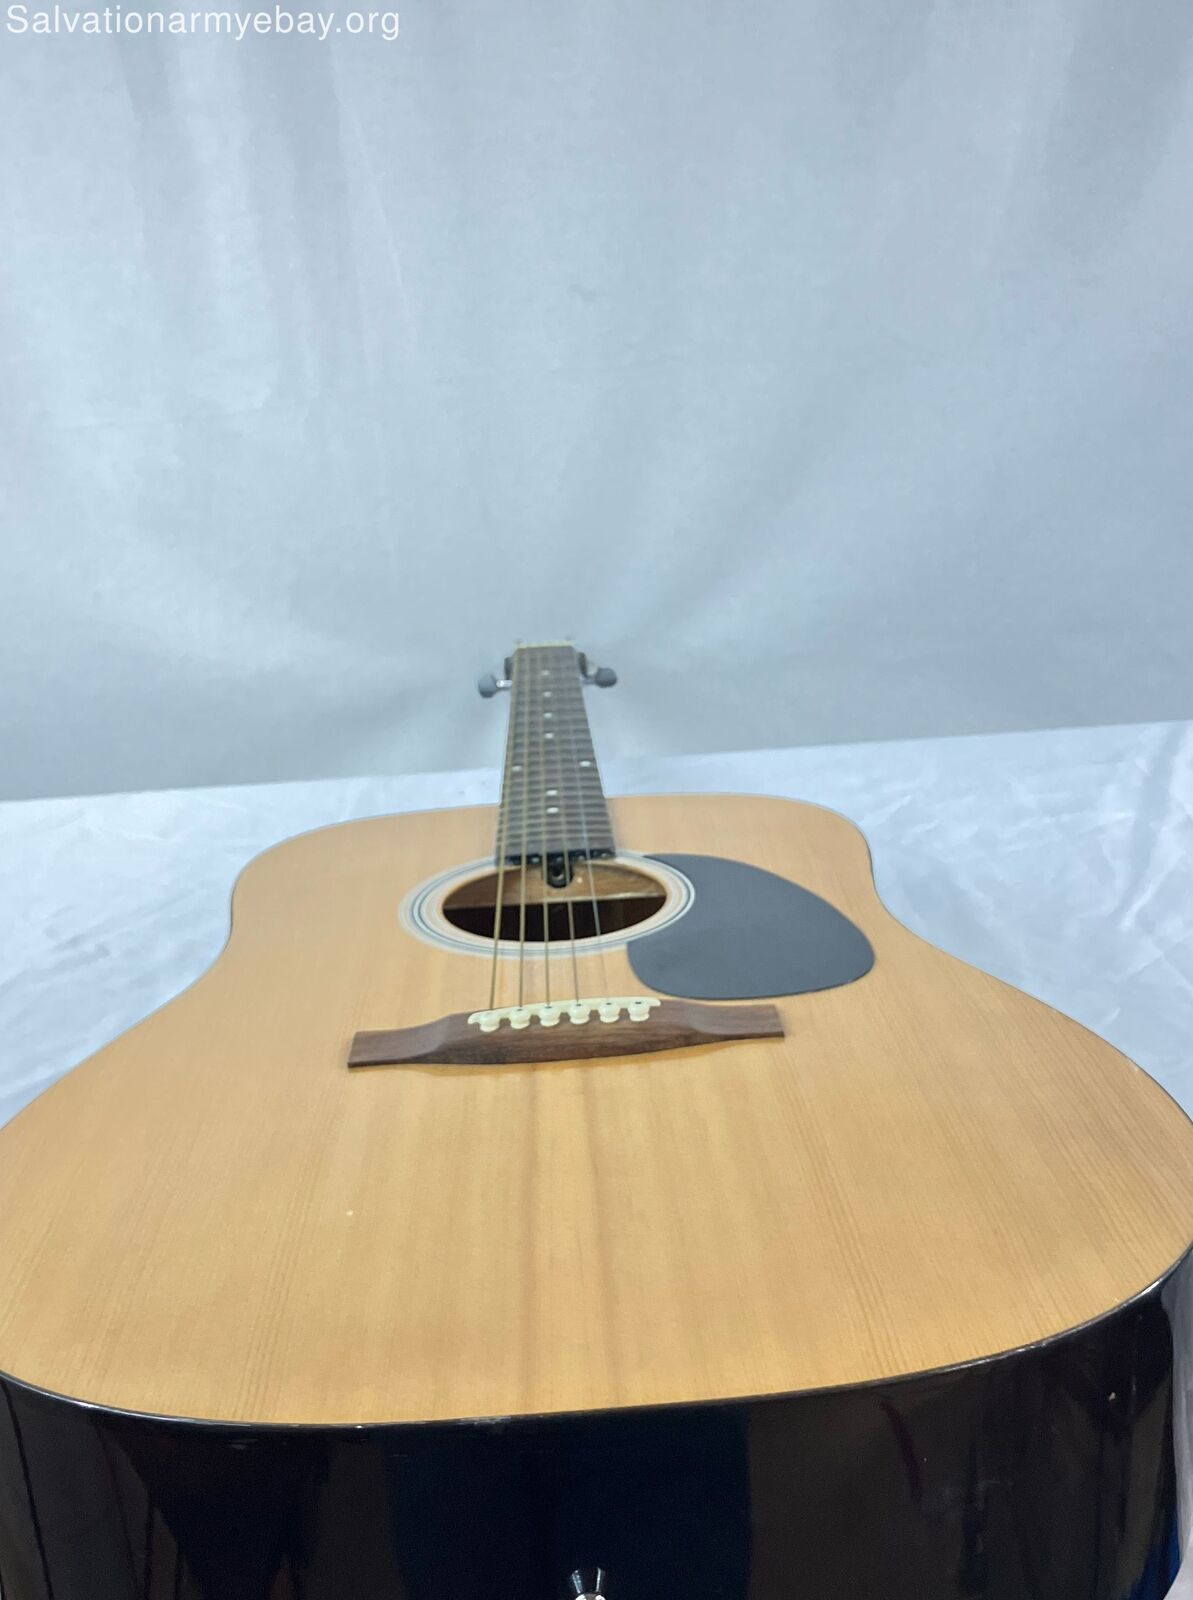 Rogue RA100D Acoustic Guitar [Needs New Strings] [Has Slight Chips on Body] 6